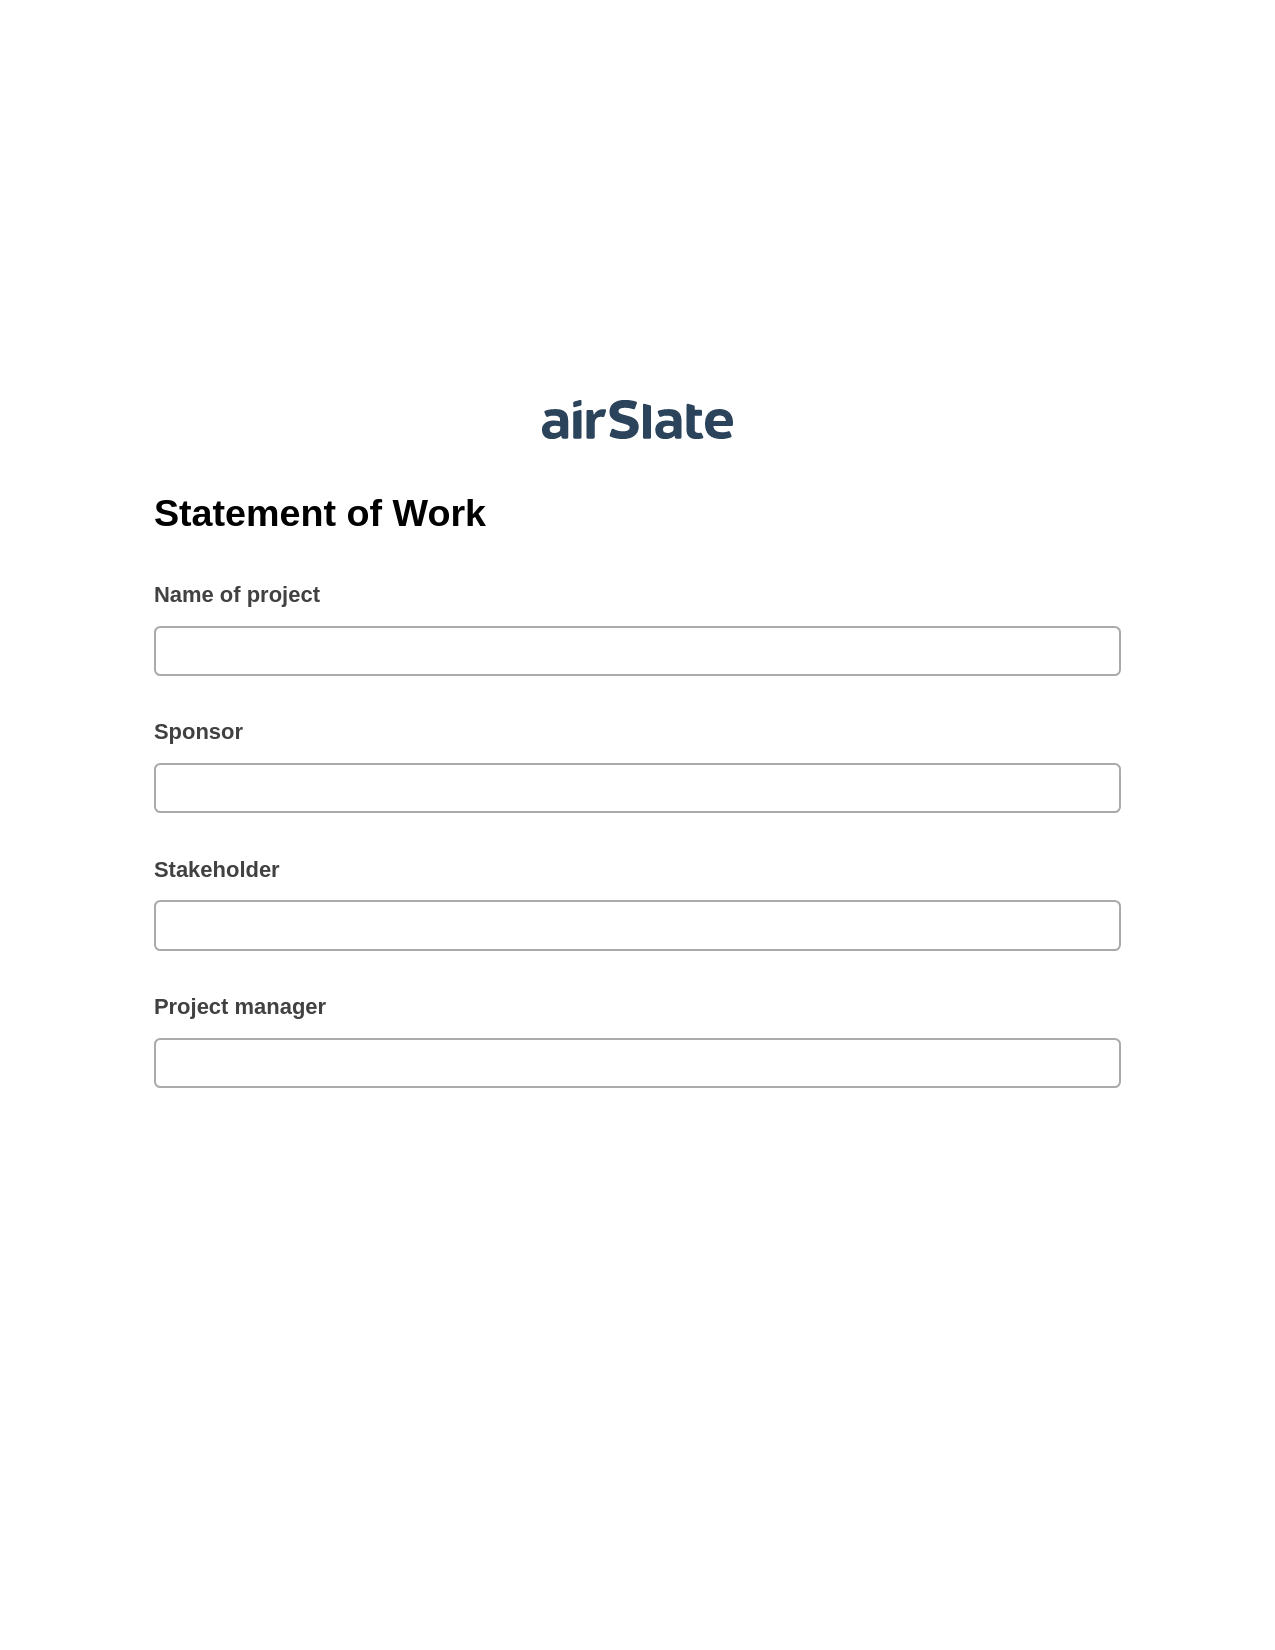 Statement of Work Pre-fill from Salesforce Record Bot, Jira Bot, Export to Formstack Documents Bot